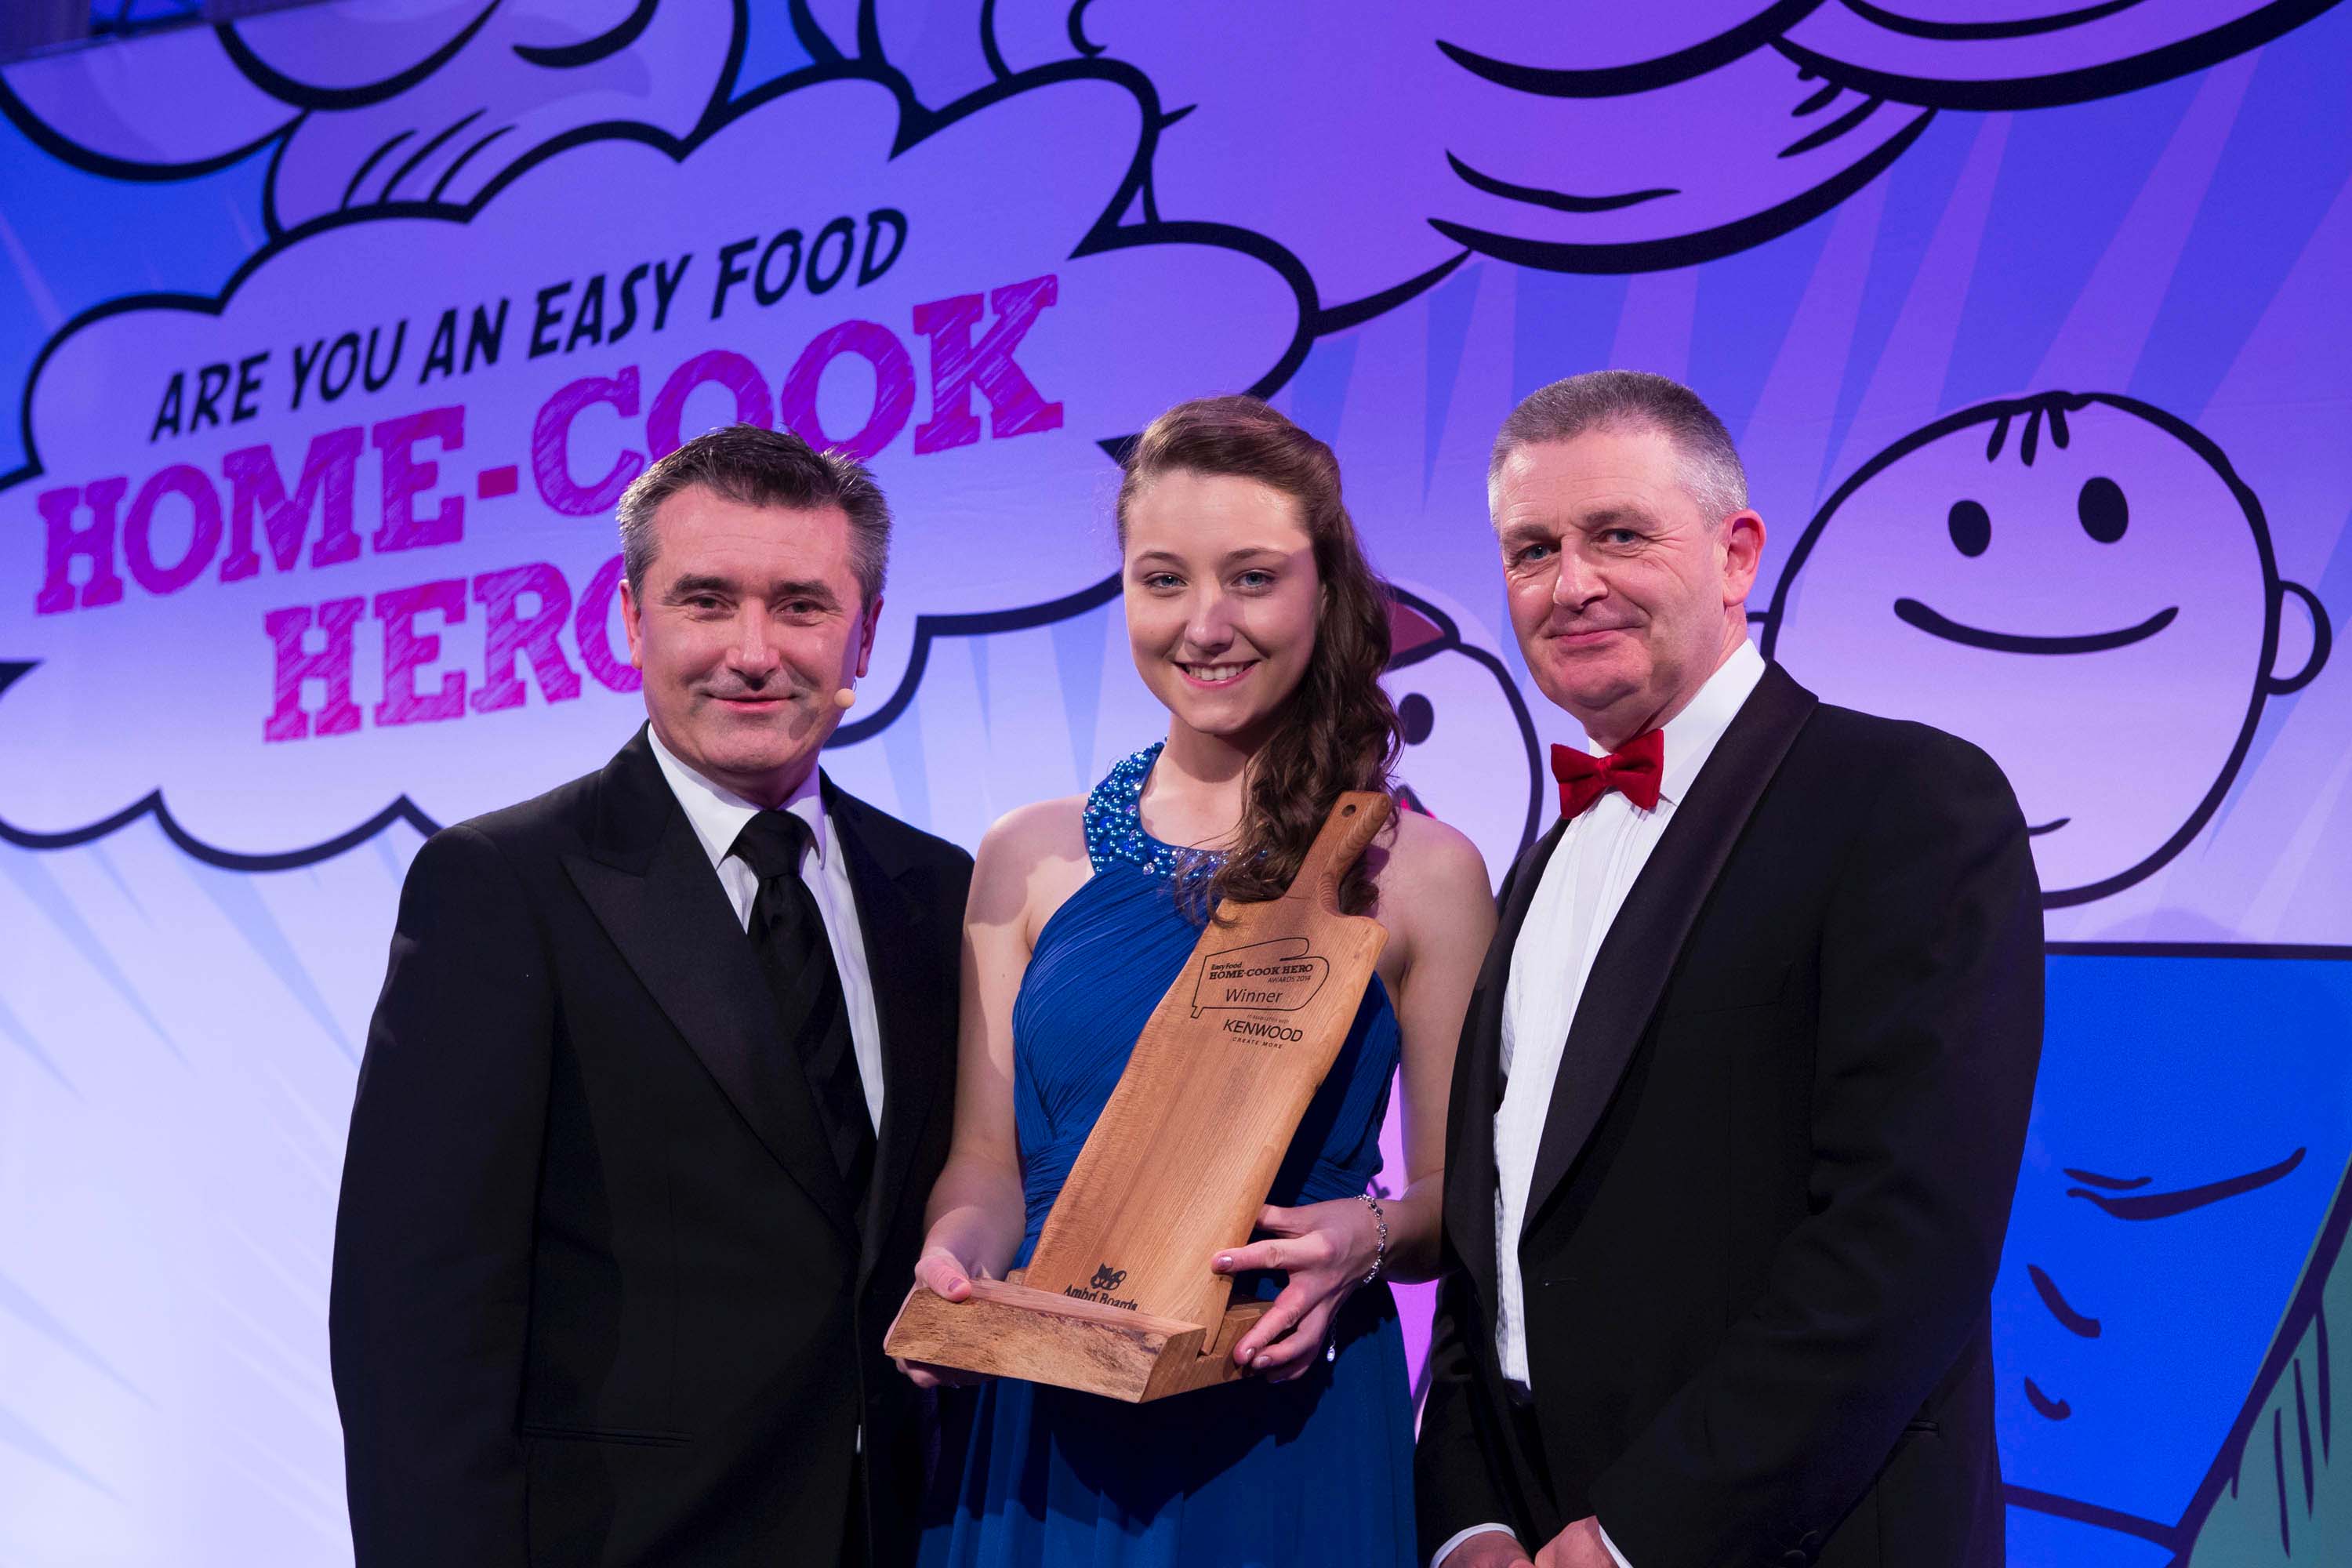 Martin King, host of the Easy Food Home-Cook Hero Awards 2014 with Fabulous Fowl winner Orla Dunleavey (age 16) from Bray, Co Wicklow, presented by Paul Birch of Moy Park in the Shelbourne Hotel, Dublin. Picture: Andres Poveda